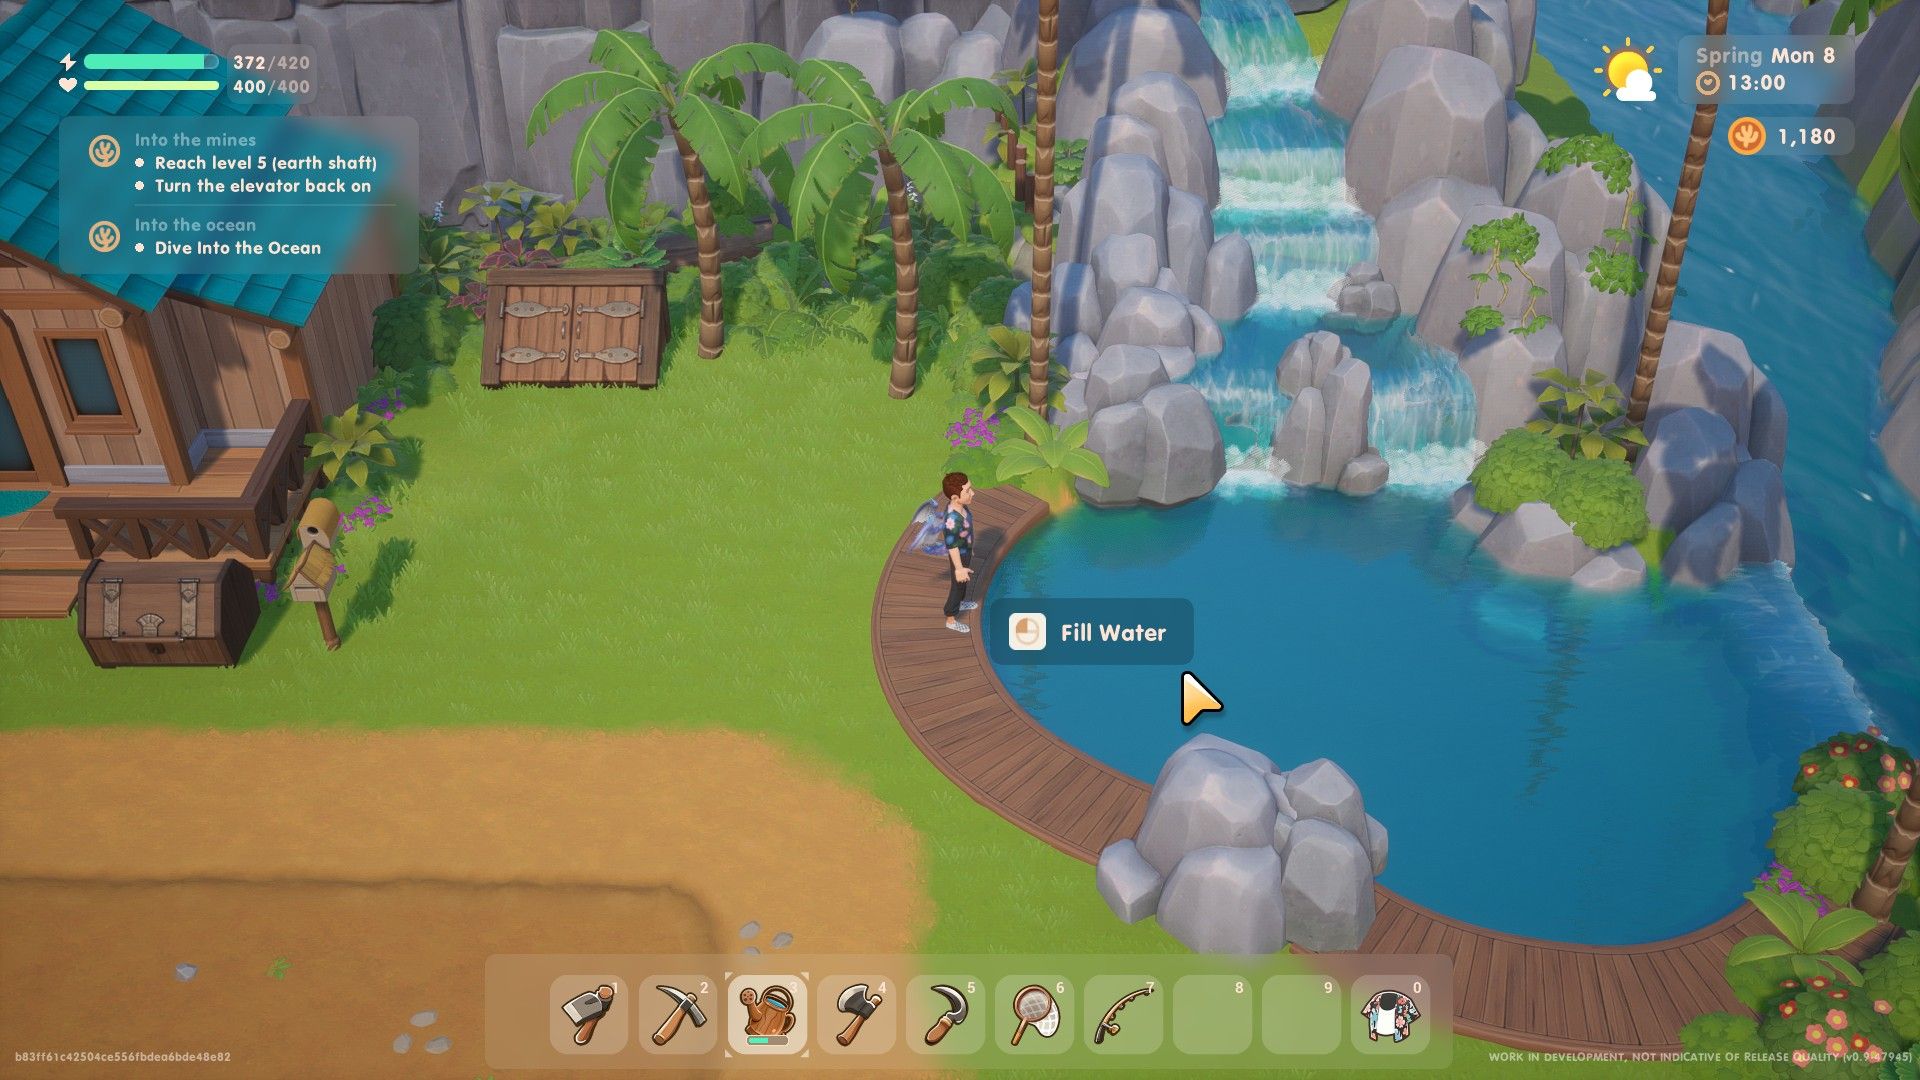 The farmer refills his watering can at a nearby pond in Coral Island